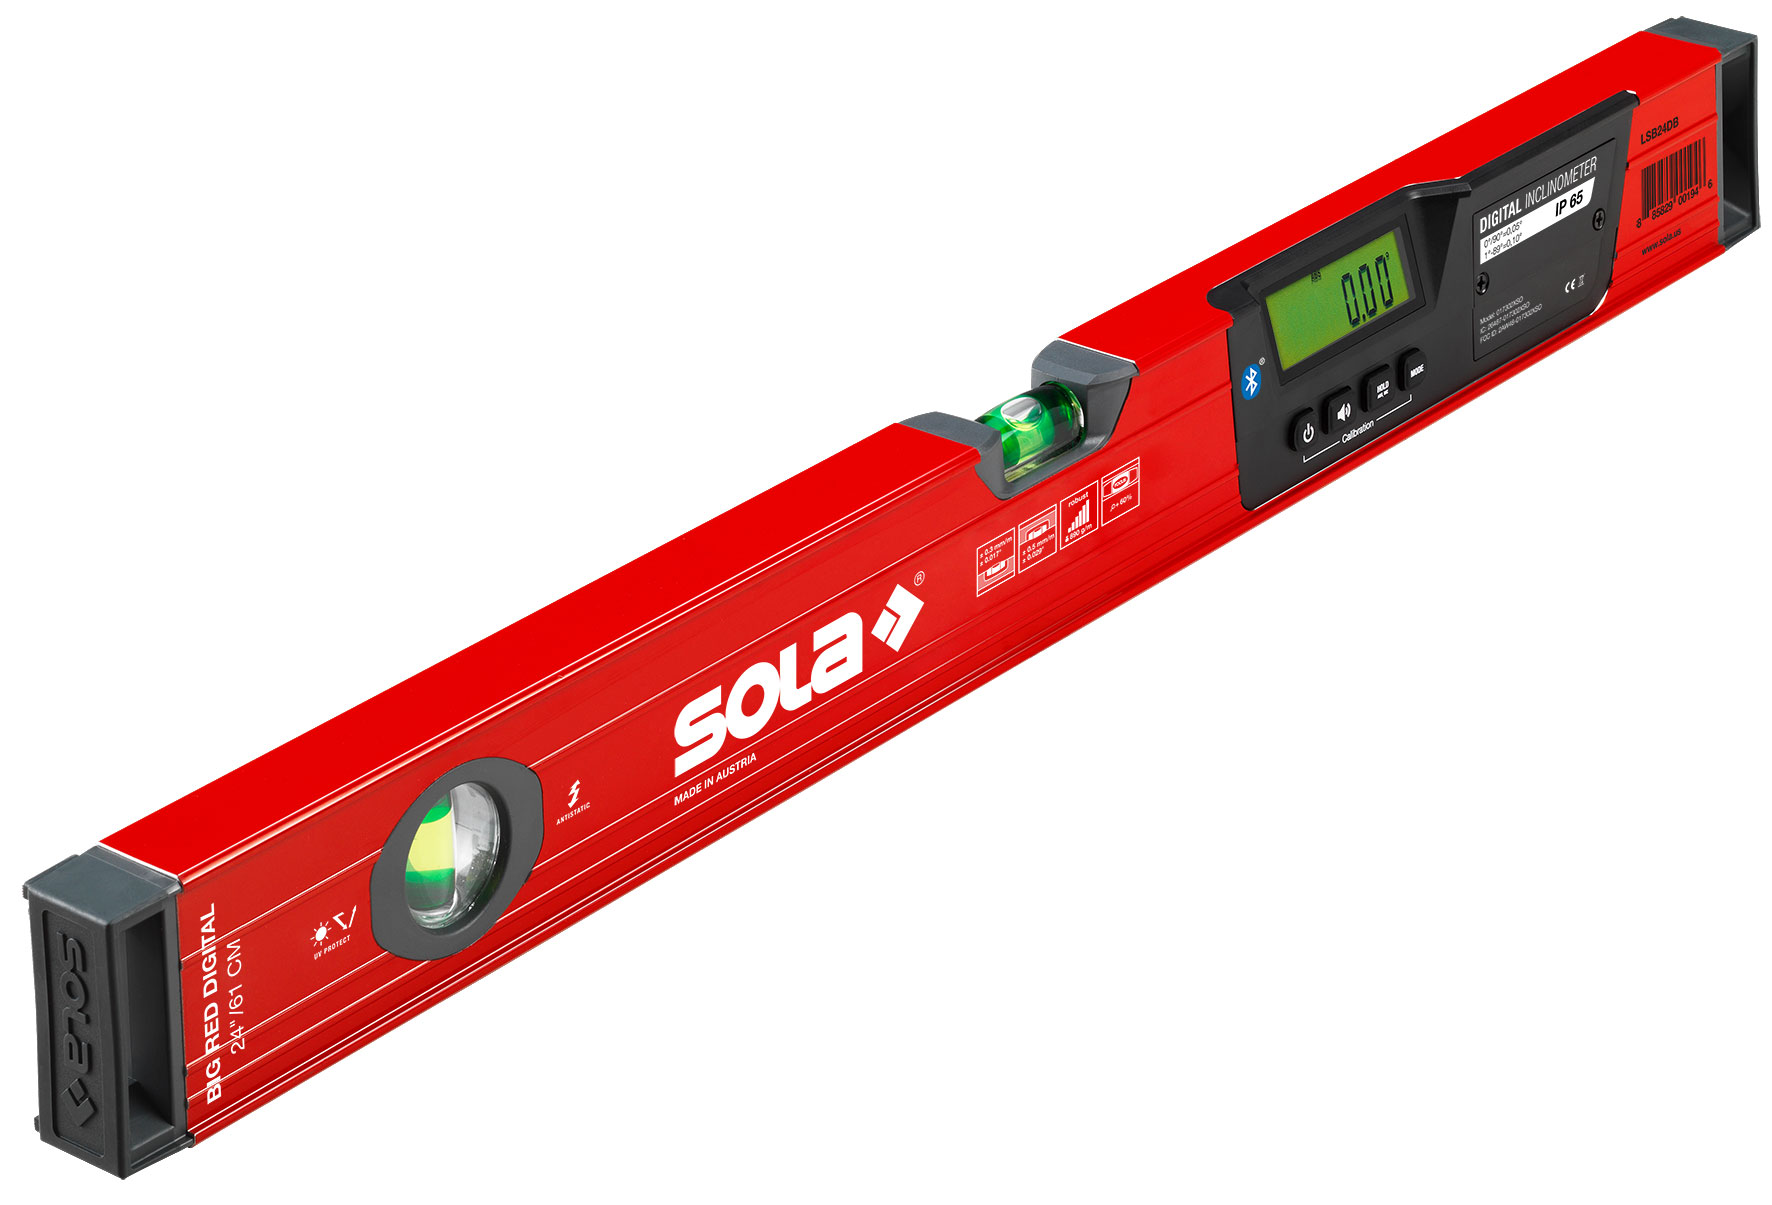 The BIG RED digital levels are ideal to use anywhere, where inclinations, slopes and angles need to be measured quickly and precisely.